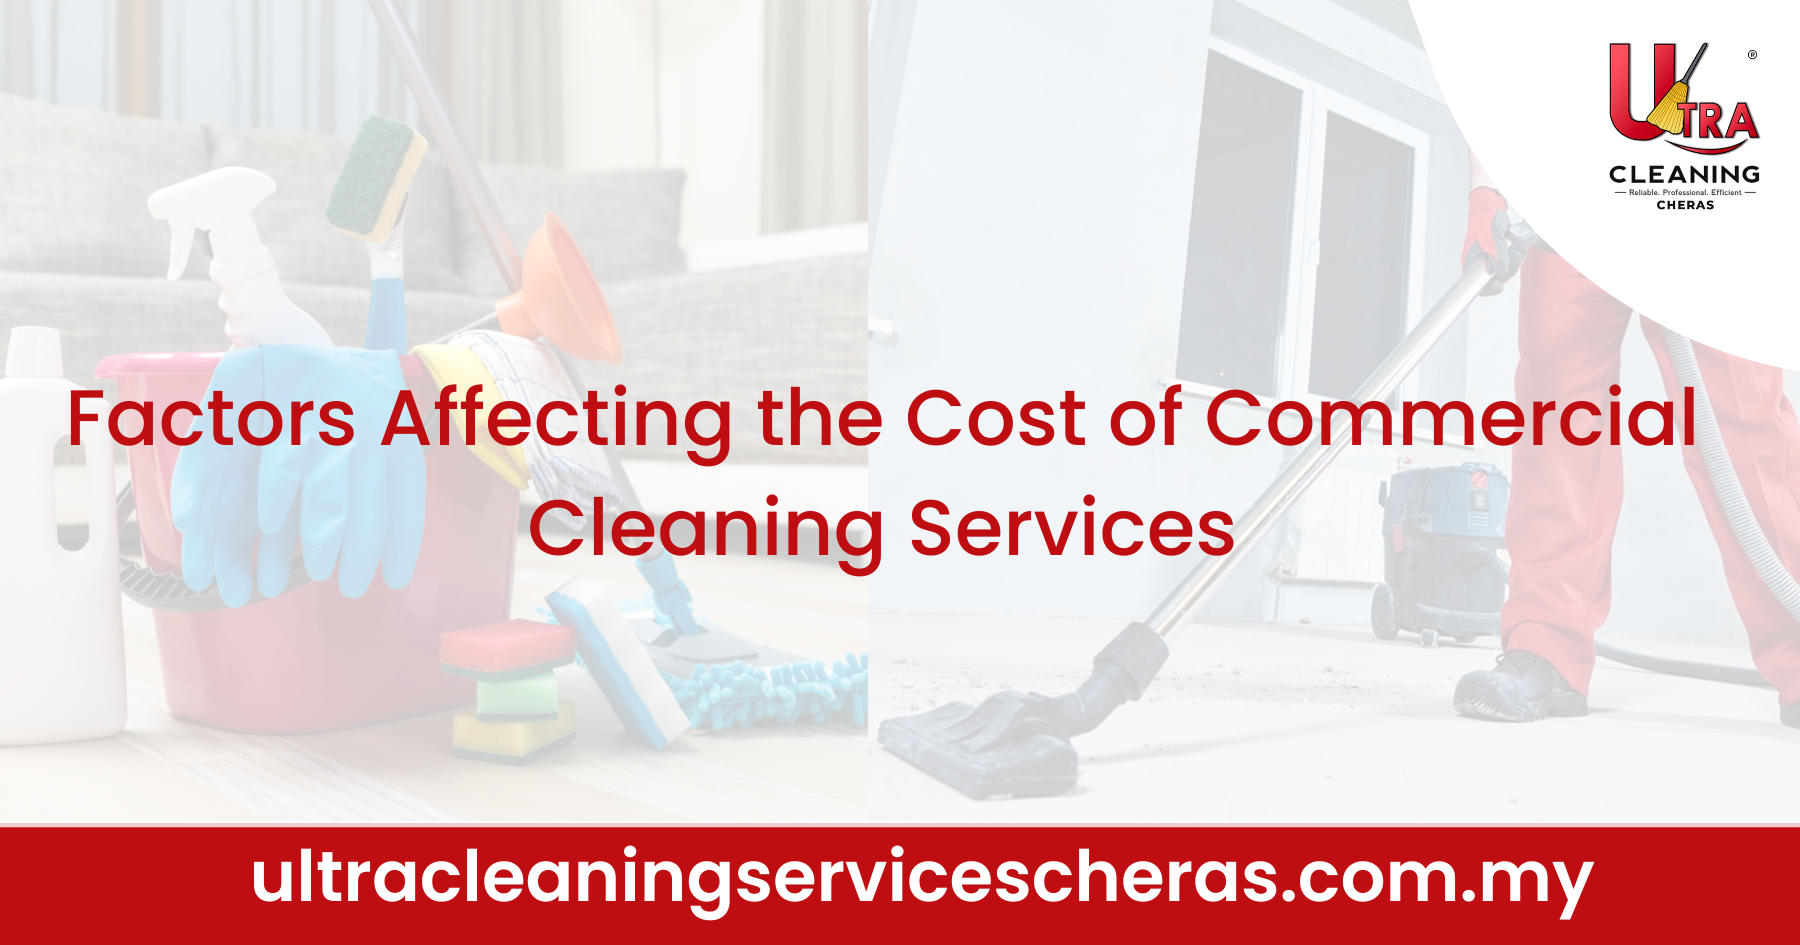 Factors Affecting the Cost of Commercial Cleaning Services